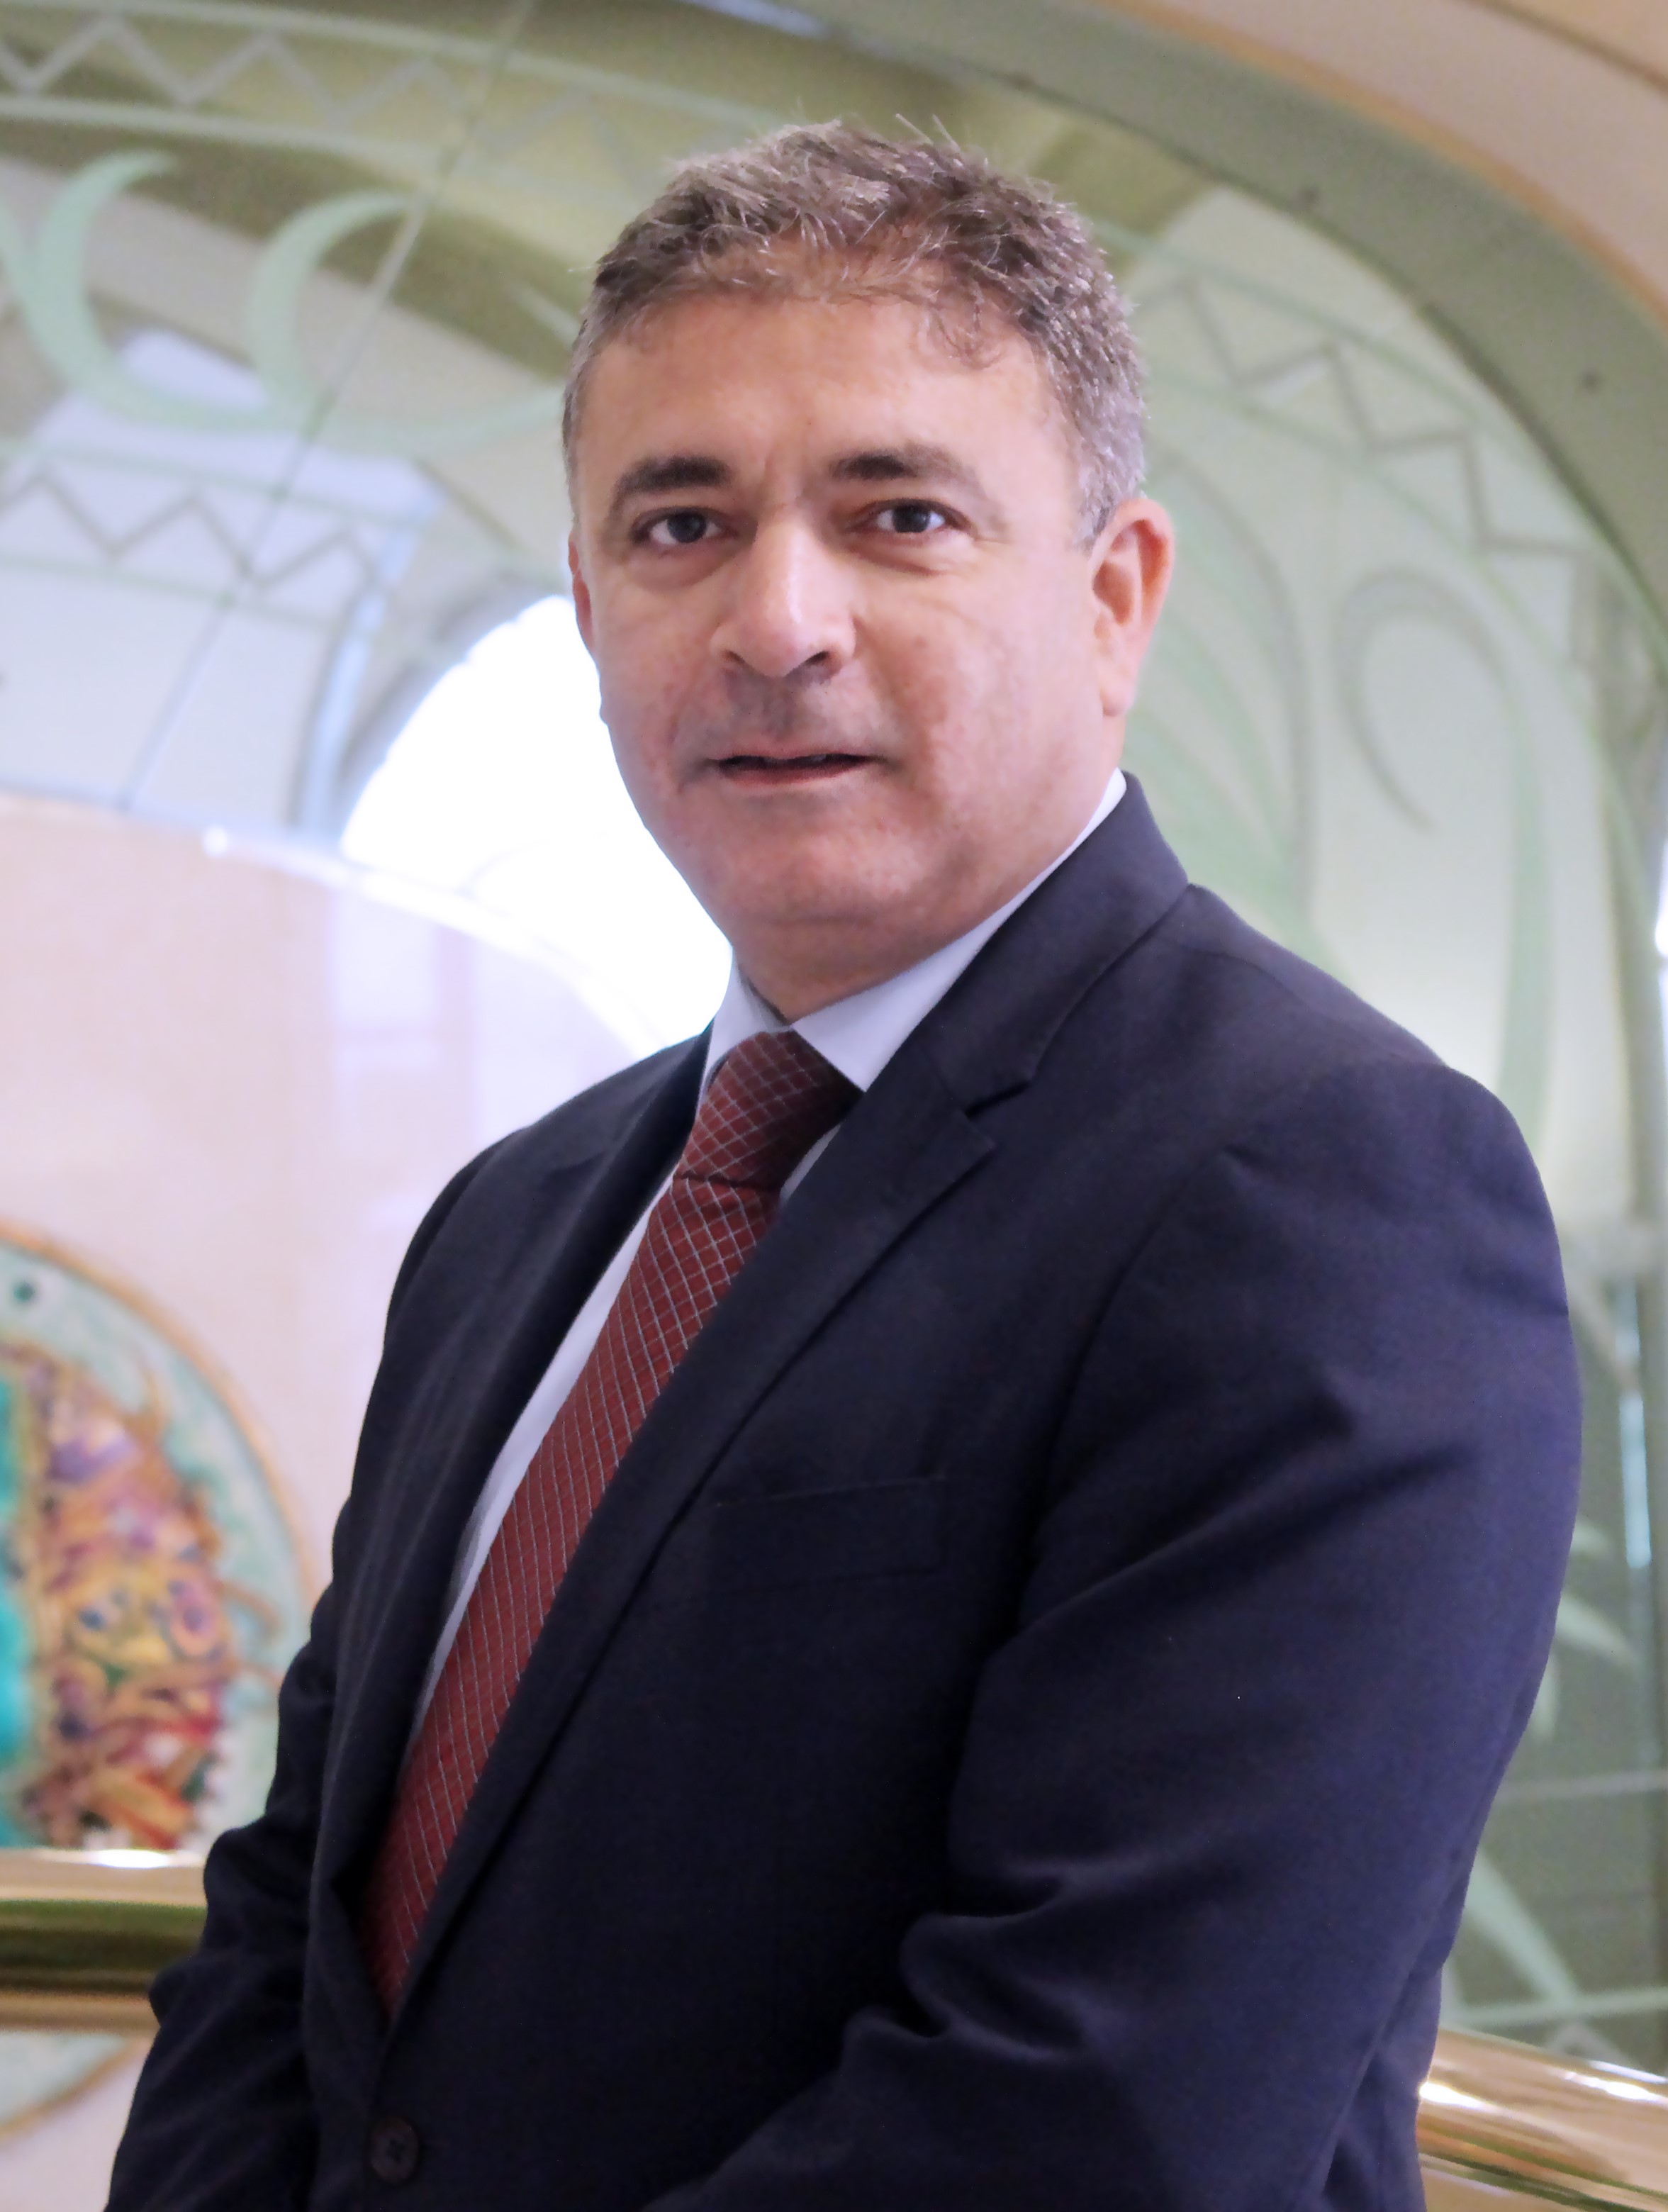 Mrad El Khoury Has Been Appointed General Manager At Crowne Plaza